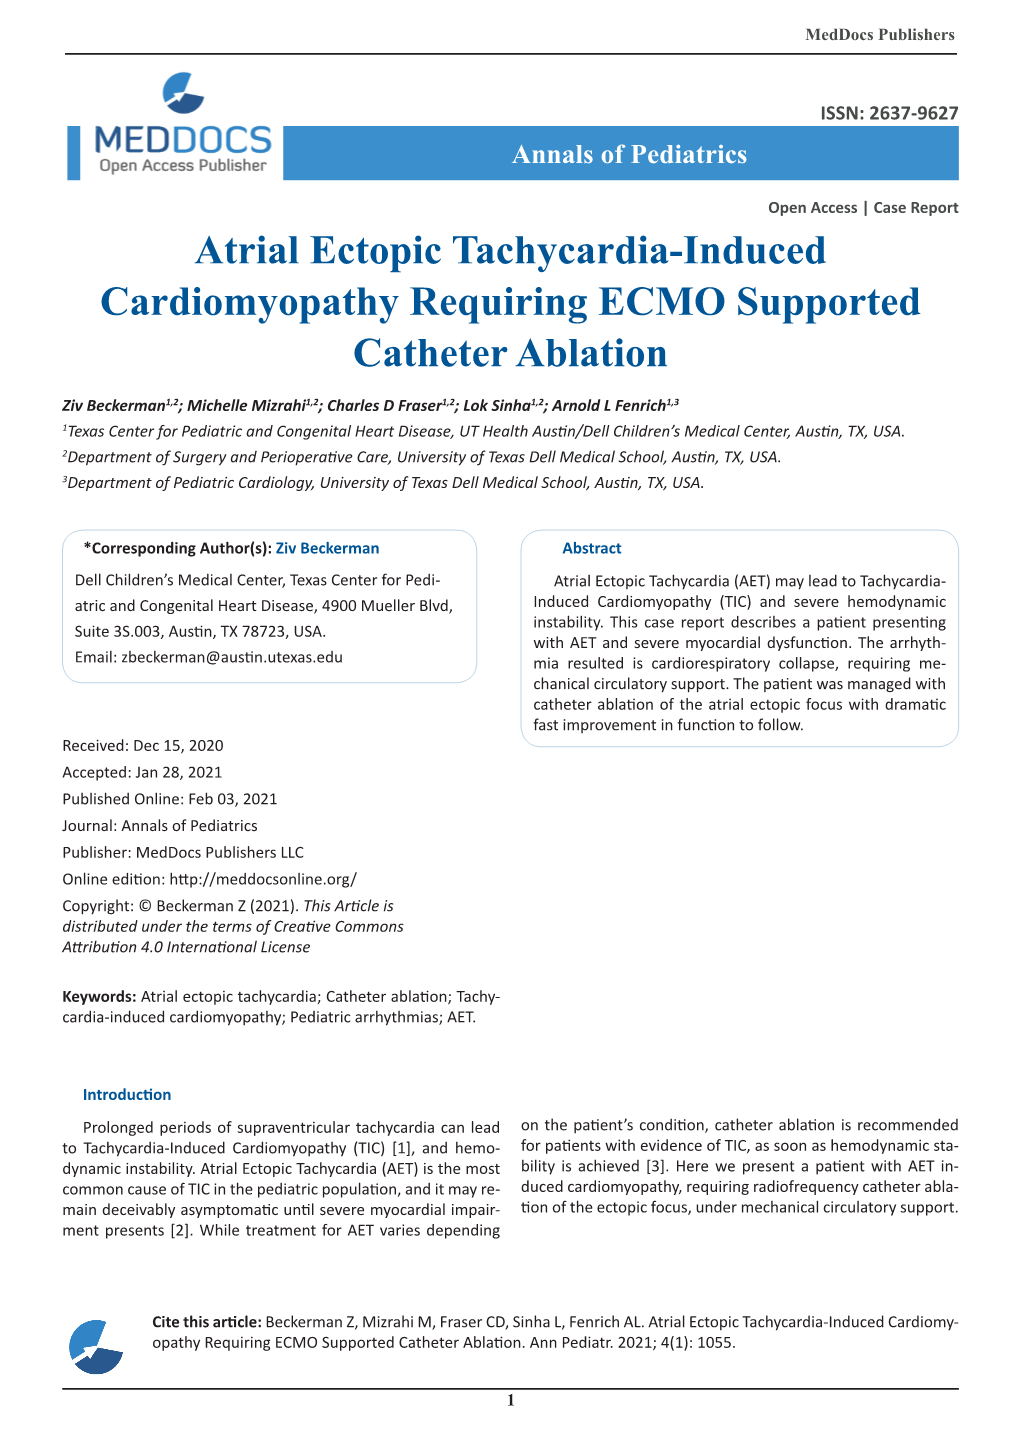 Atrial Ectopic Tachycardia-Induced Cardiomyopathy Requiring ECMO Supported Catheter Ablation